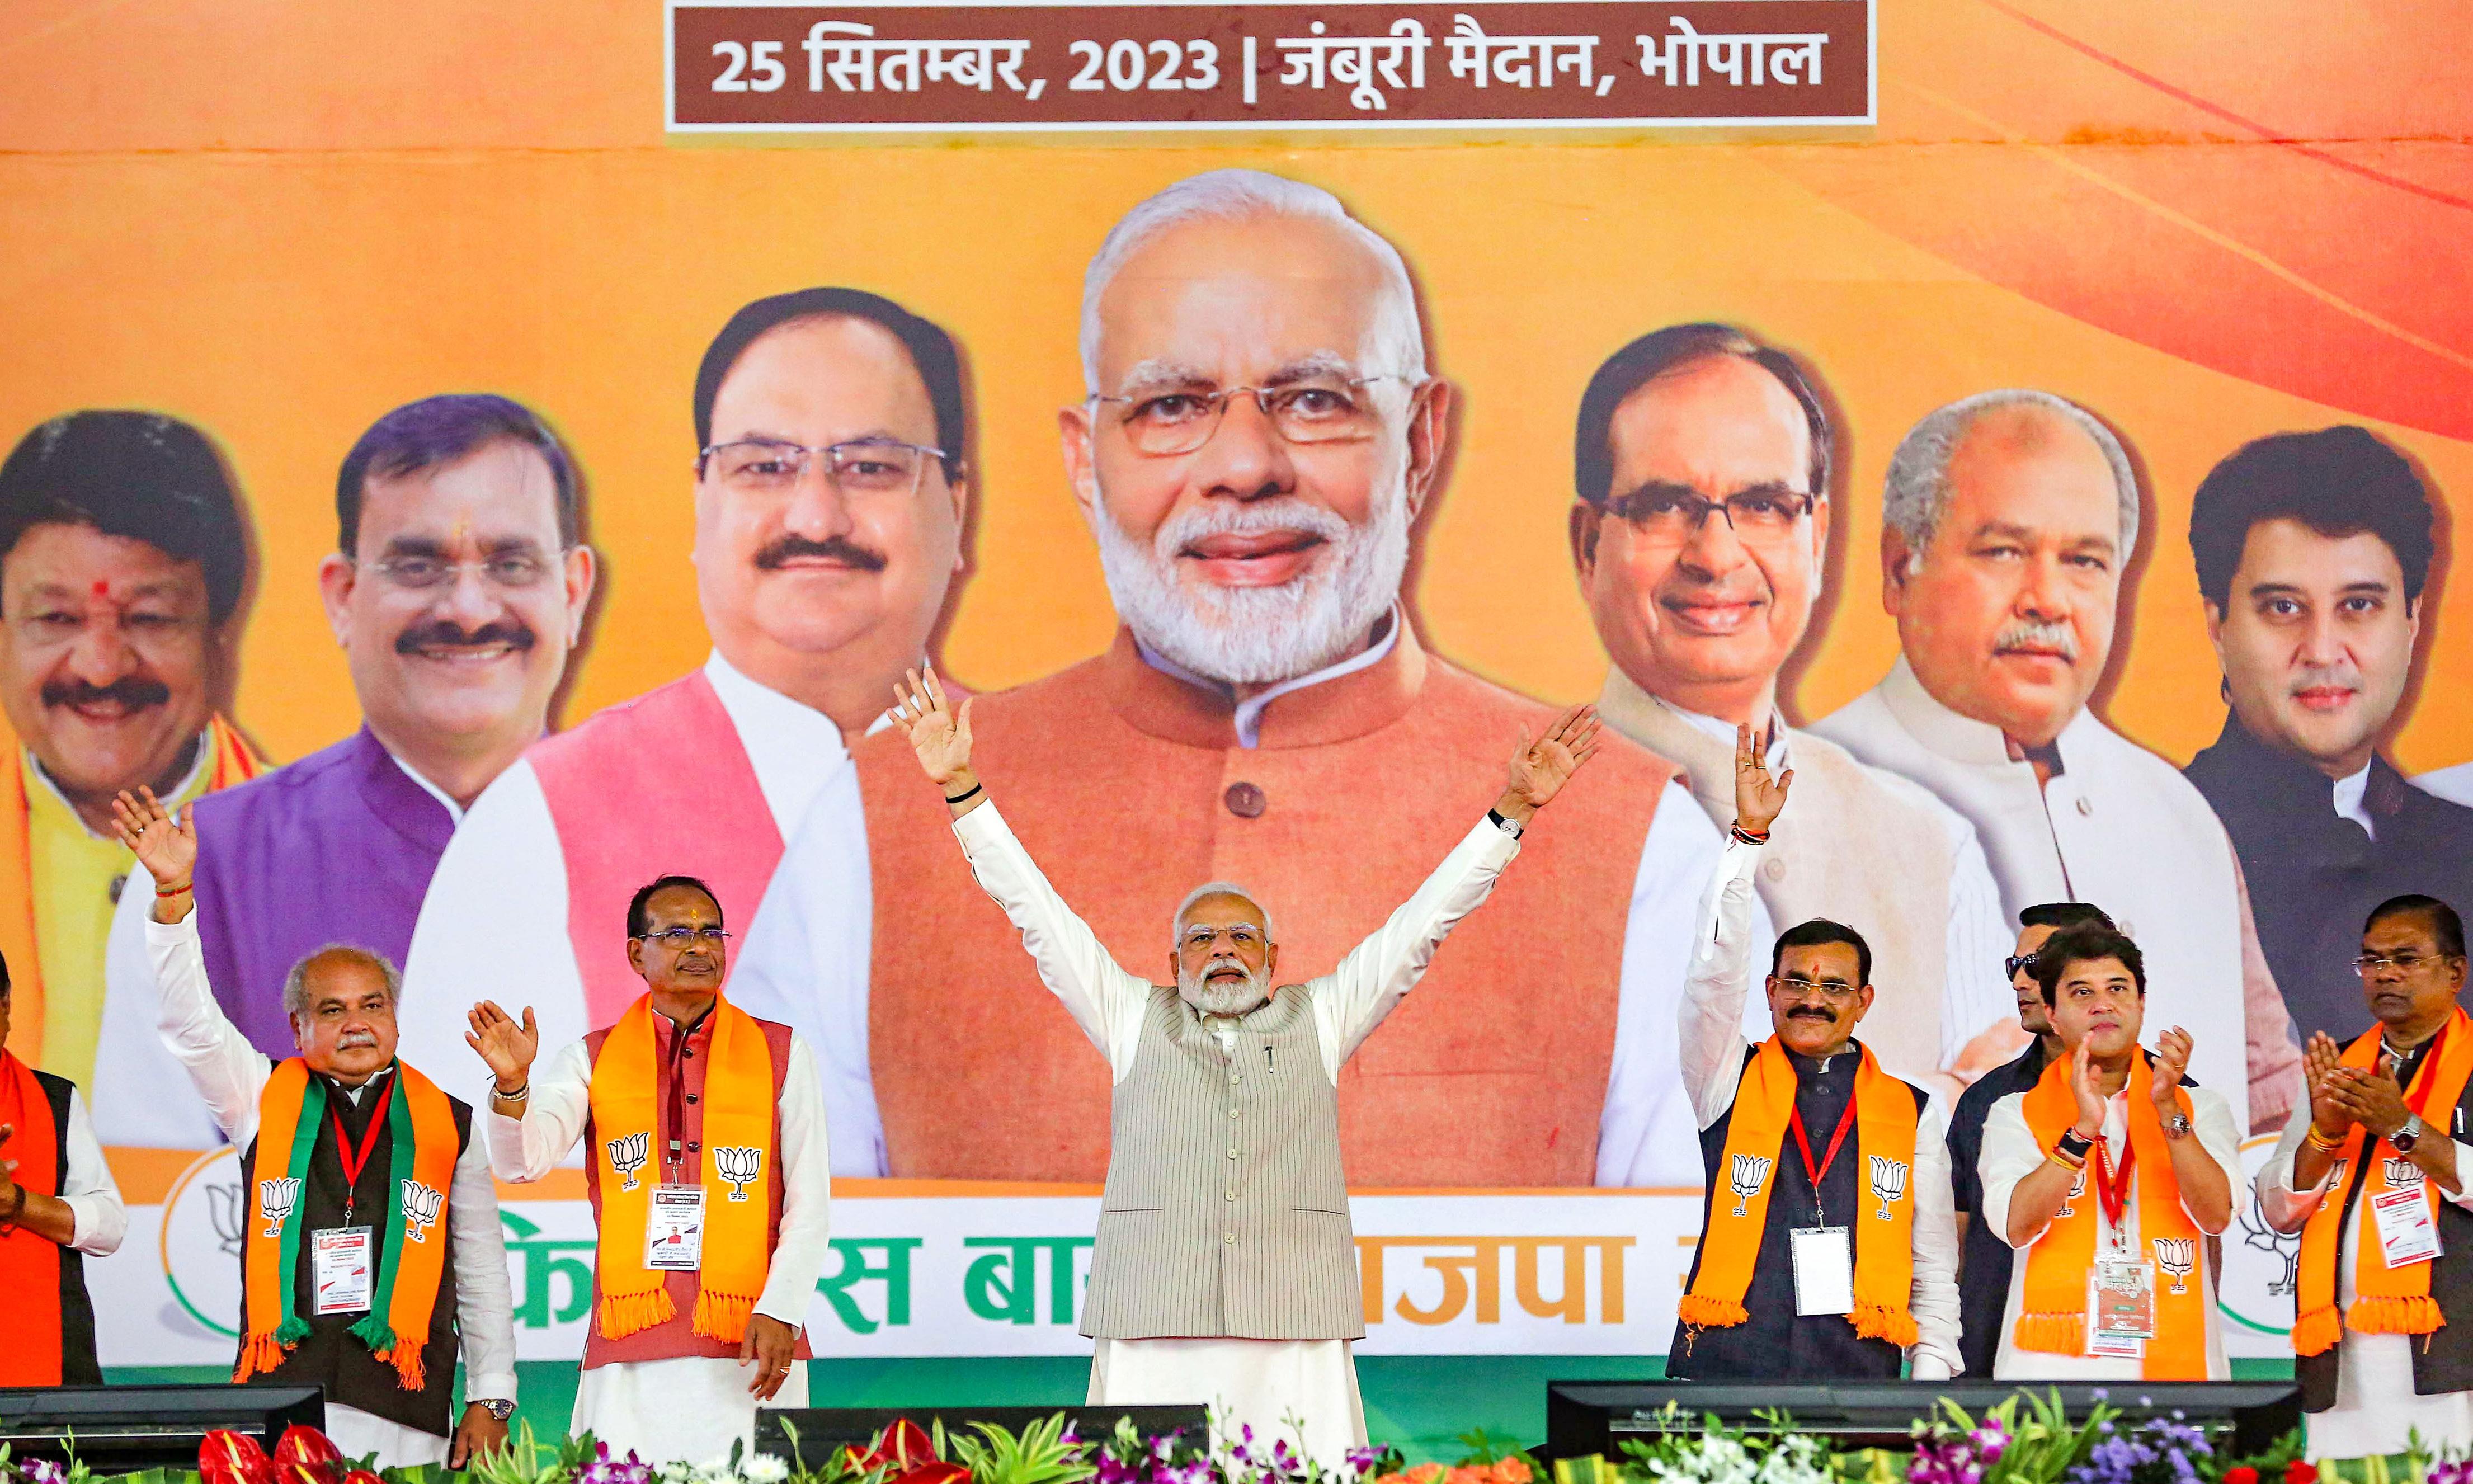 Delhi to Bhopal: Why BJP’s Parliament heavyweights are contesting in MP